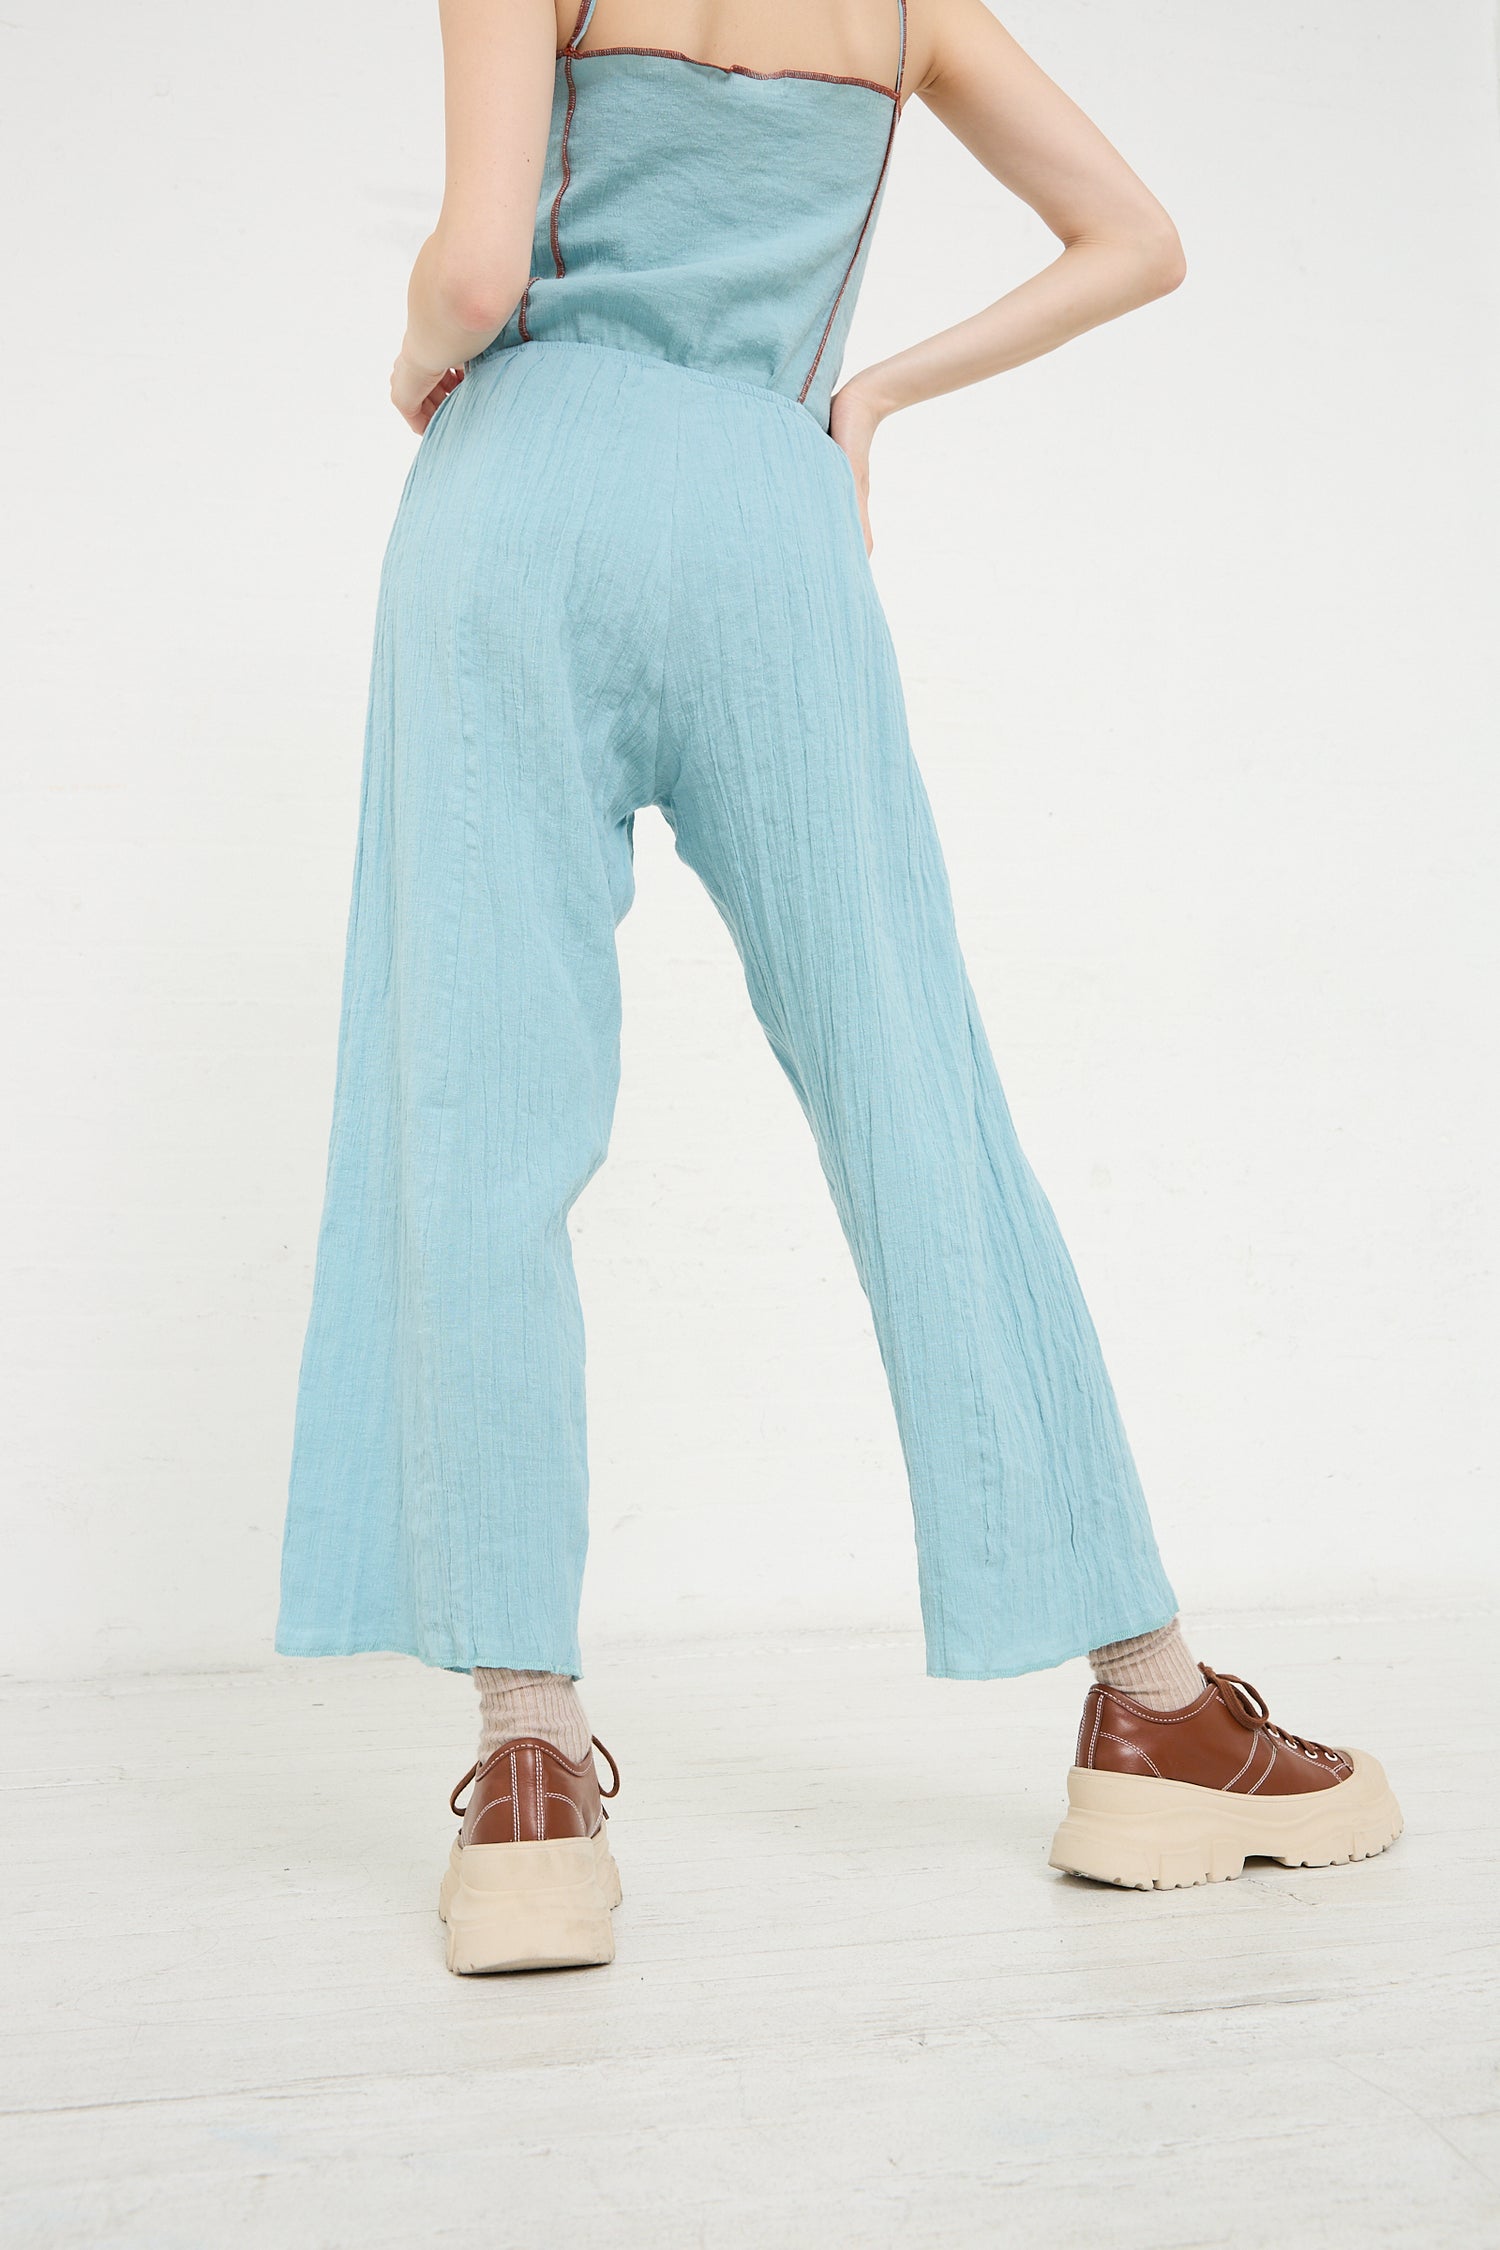 Person wearing the Baserange Crinkle Linen Cotton Shok Pant in Wuxi Blue and chunky brown shoes viewed from the back.